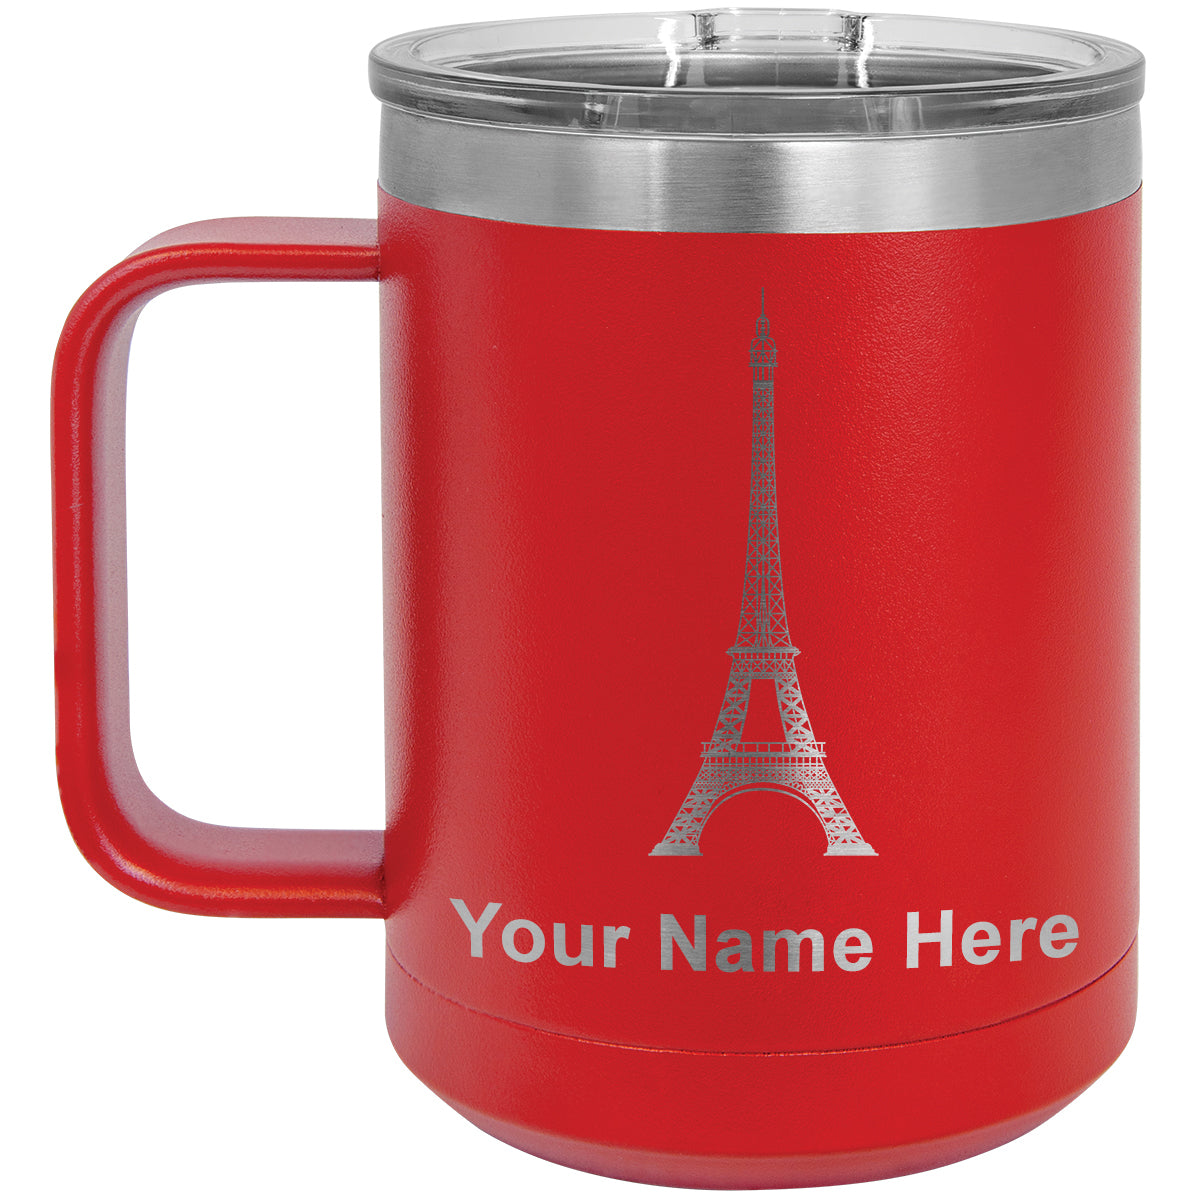 15oz Vacuum Insulated Coffee Mug, Eiffel Tower, Personalized Engraving Included